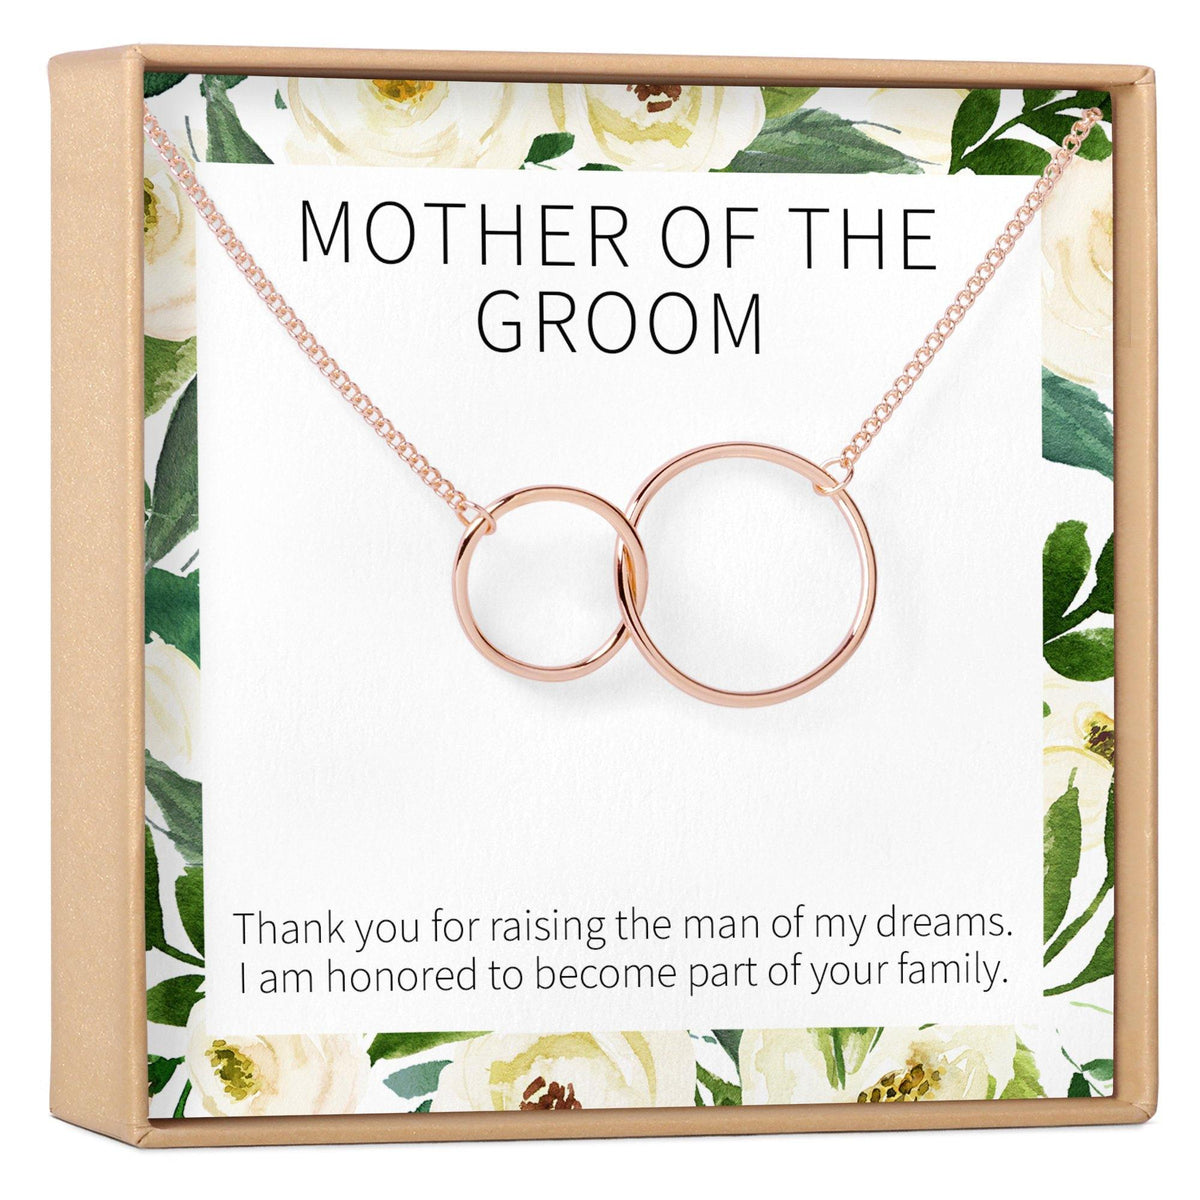 Mother of the Groom Necklace - Dear Ava, Jewelry / Necklaces / Pendants